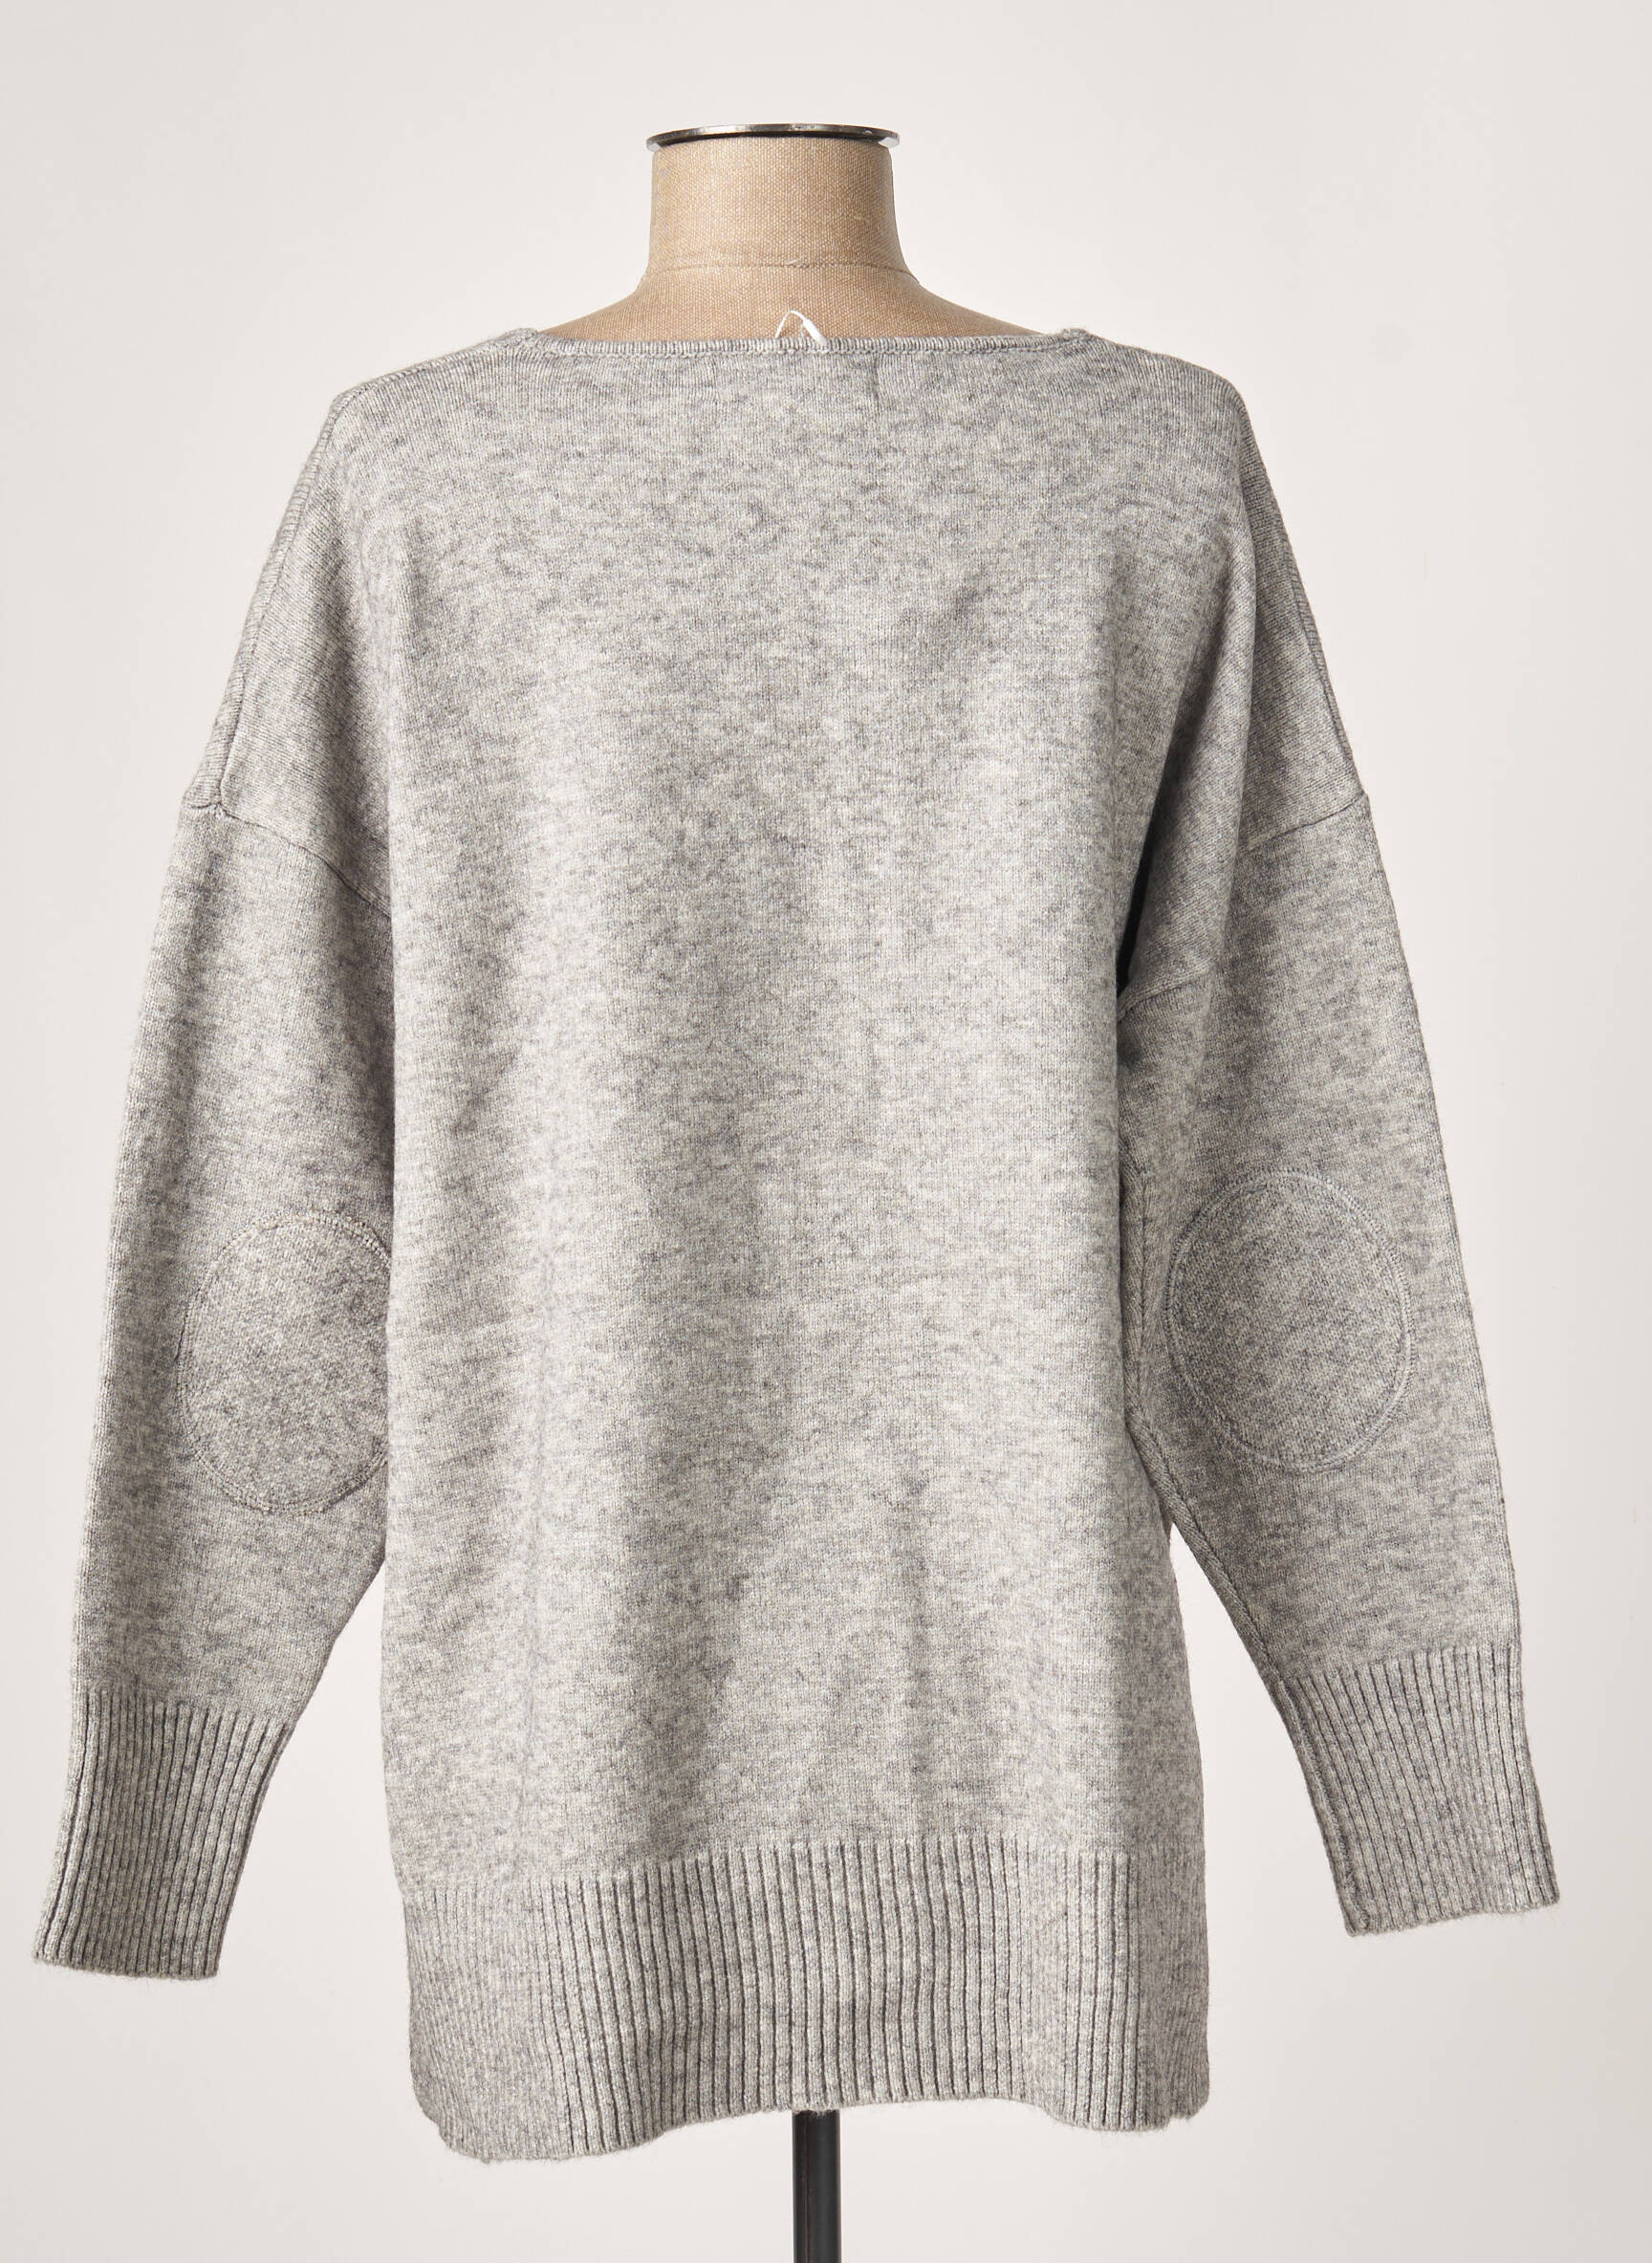 Tricot à la main WOOL pull oversize femme pull V col slouchy laine